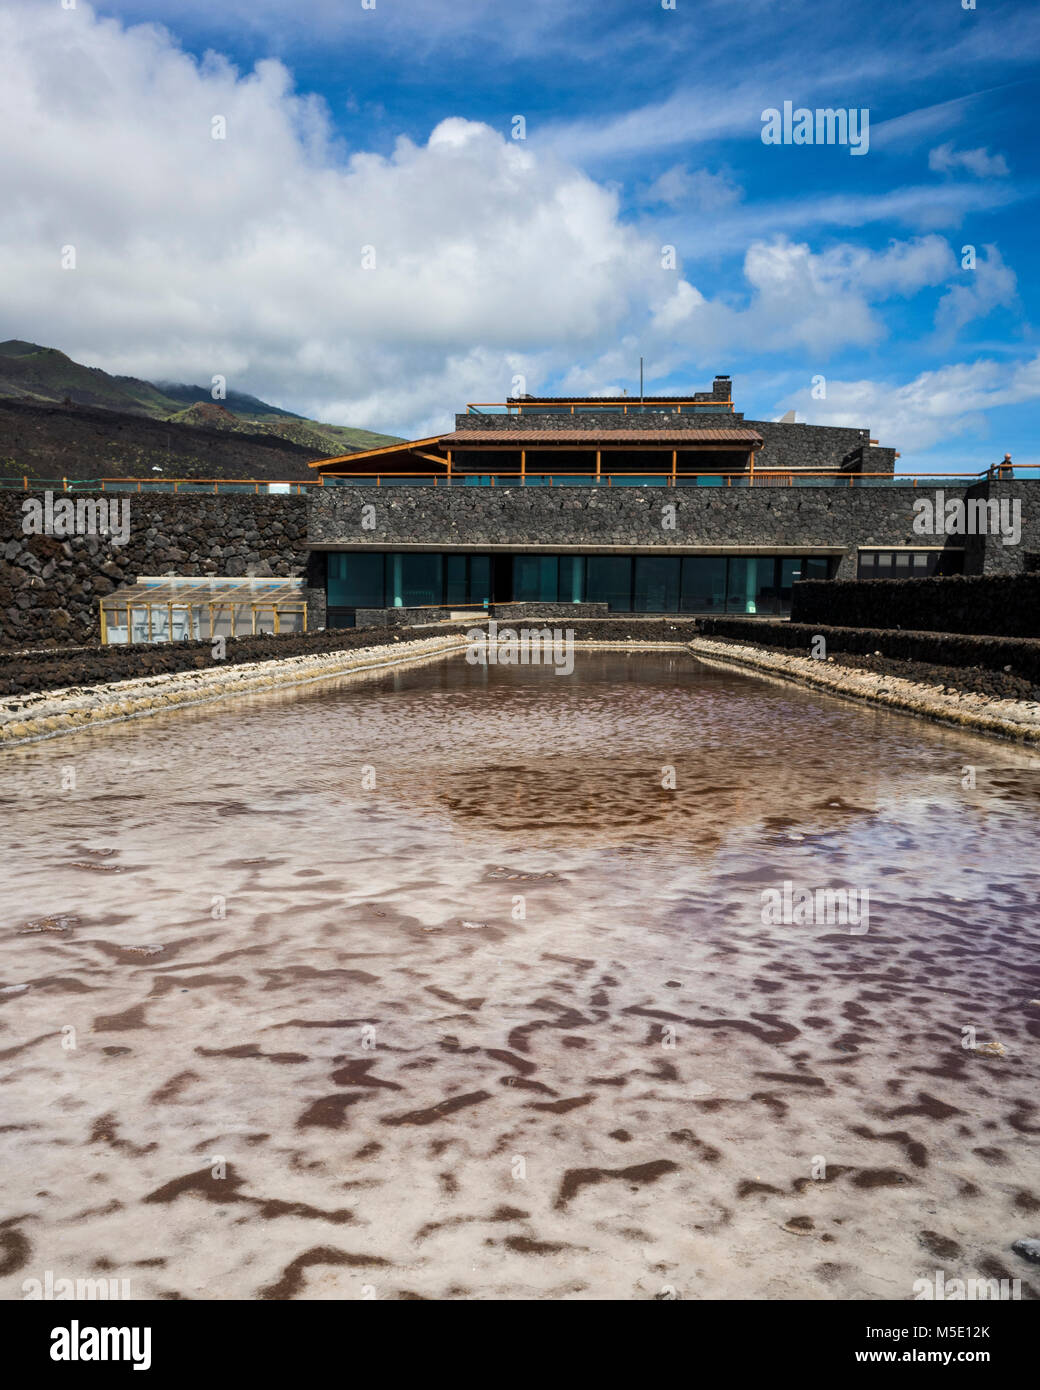 Salinas de Fuencaliente, La Palma. Canary Islands Spain.  The Fuencaliente salt evaporation ponds used to harvest sea salt lie on the seashore.  This site marks the most southern end of La Palma.  Photographed with a Ricoh GRII camera. Stock Photo